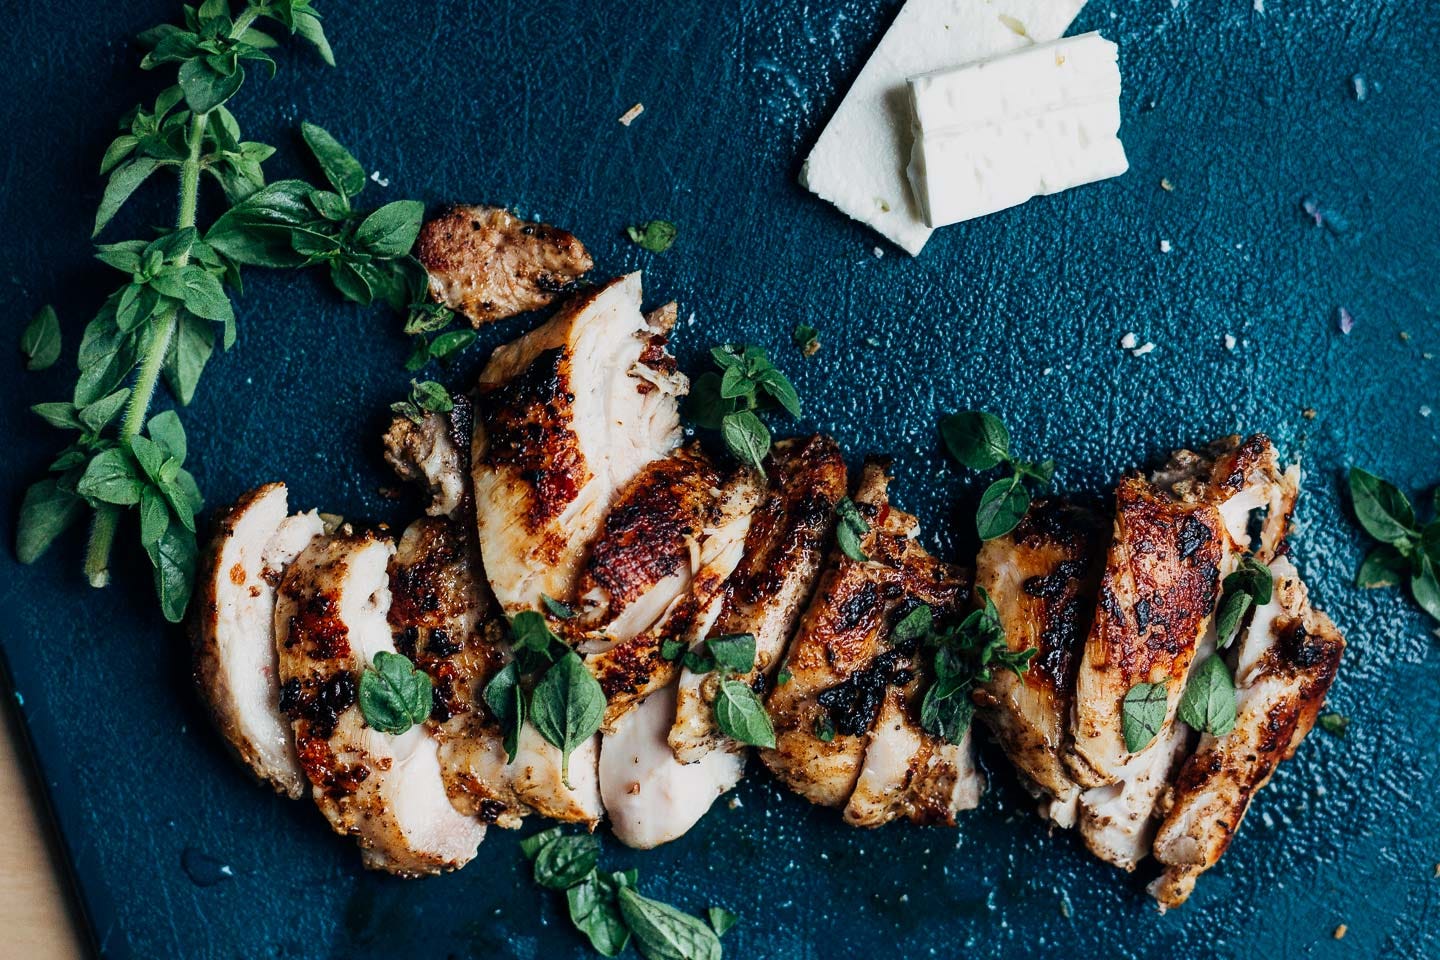 Sliced chicken on a cutting board with herbs.